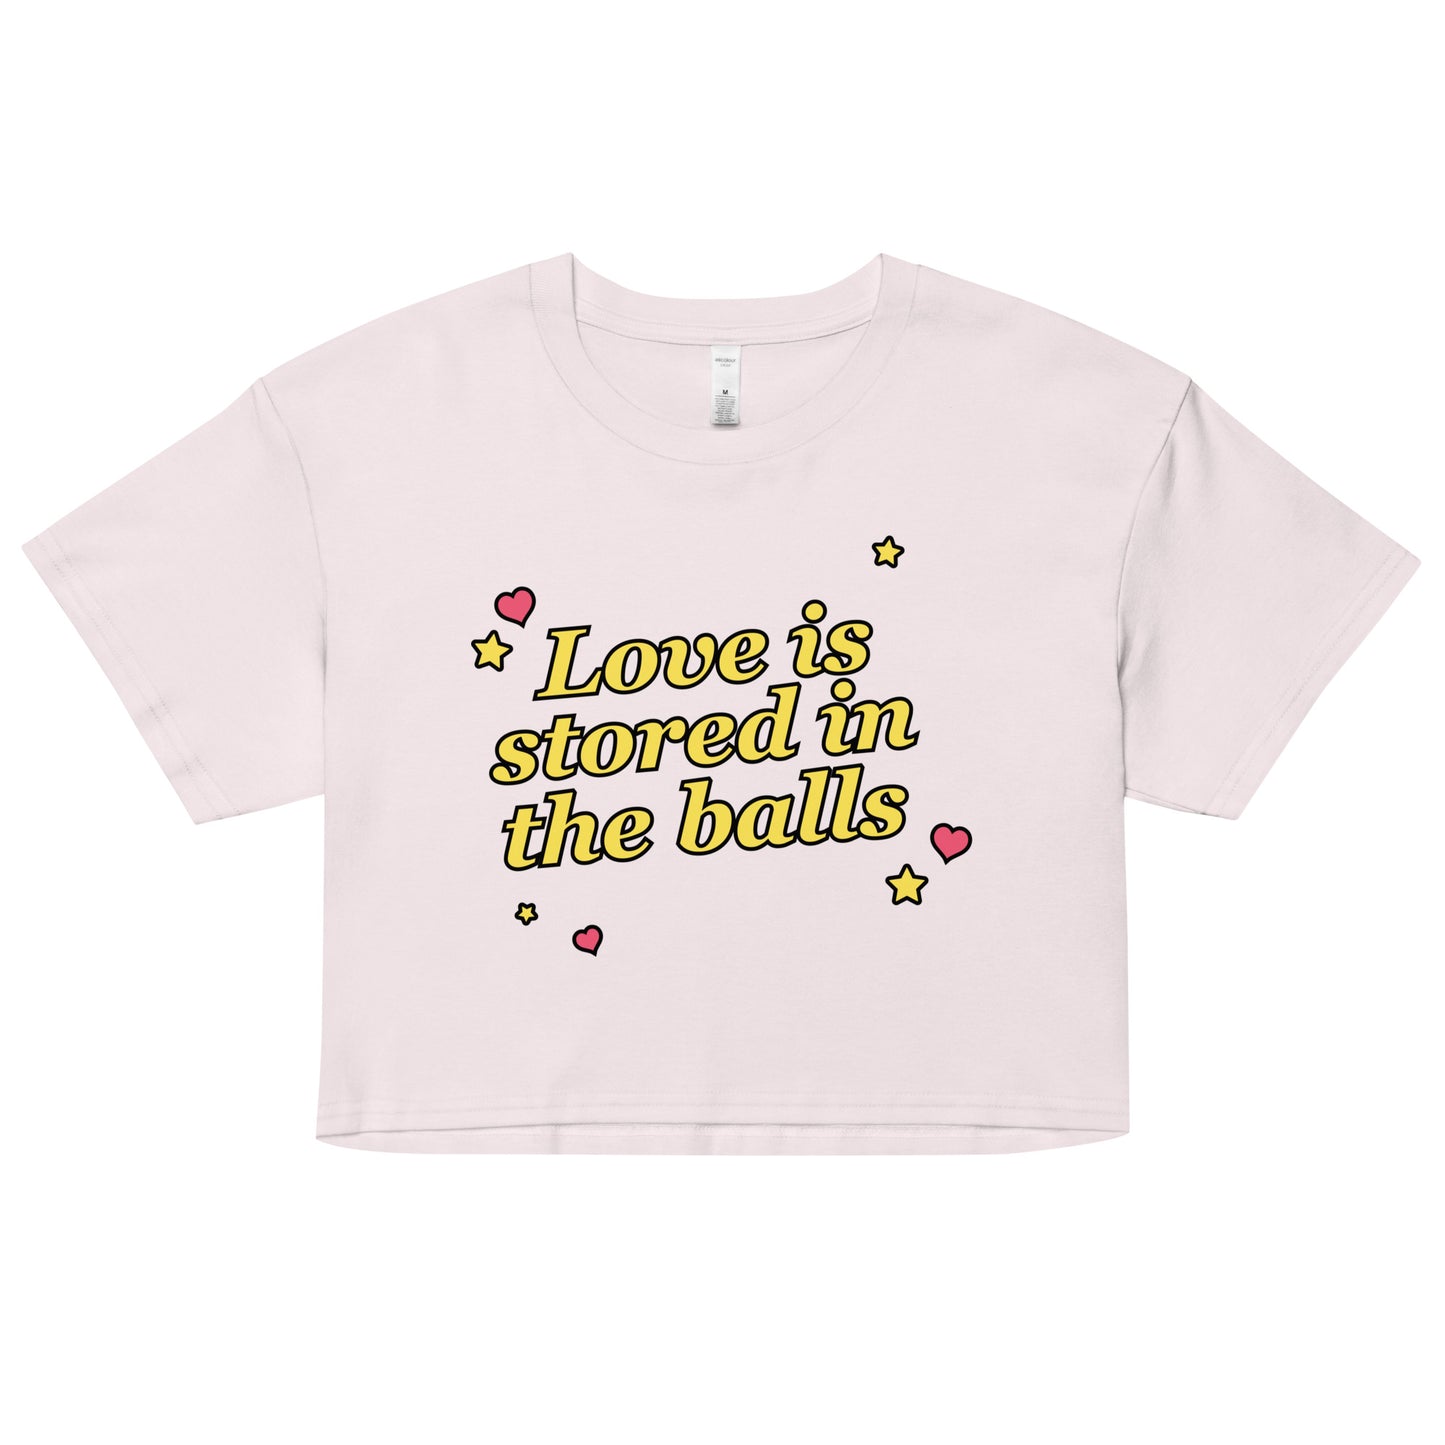 Love is Stored in the Balls crop top